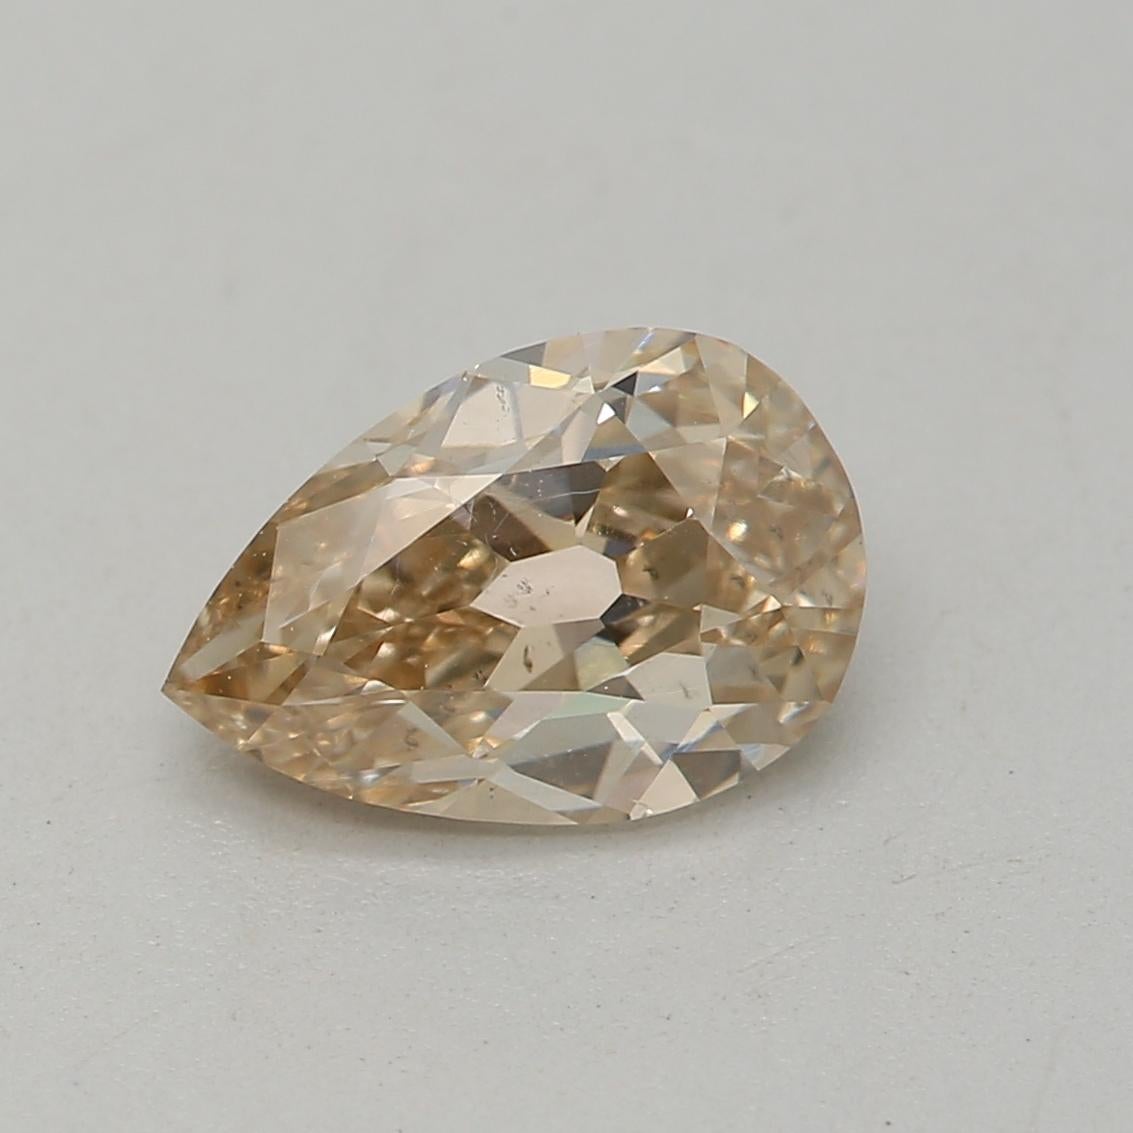 ***100% NATURAL FANCY COLOUR DIAMOND***

✪ Diamond Details ✪

➛ Shape: Pear
➛ Colour Grade: Fancy Light Yellow Brown
➛ Carat: 0.74
➛ Clarity: SI1
➛ GIA Certified 

^FEATURES OF THE DIAMOND^

This 0.74 carat diamond is a gemstone weighing